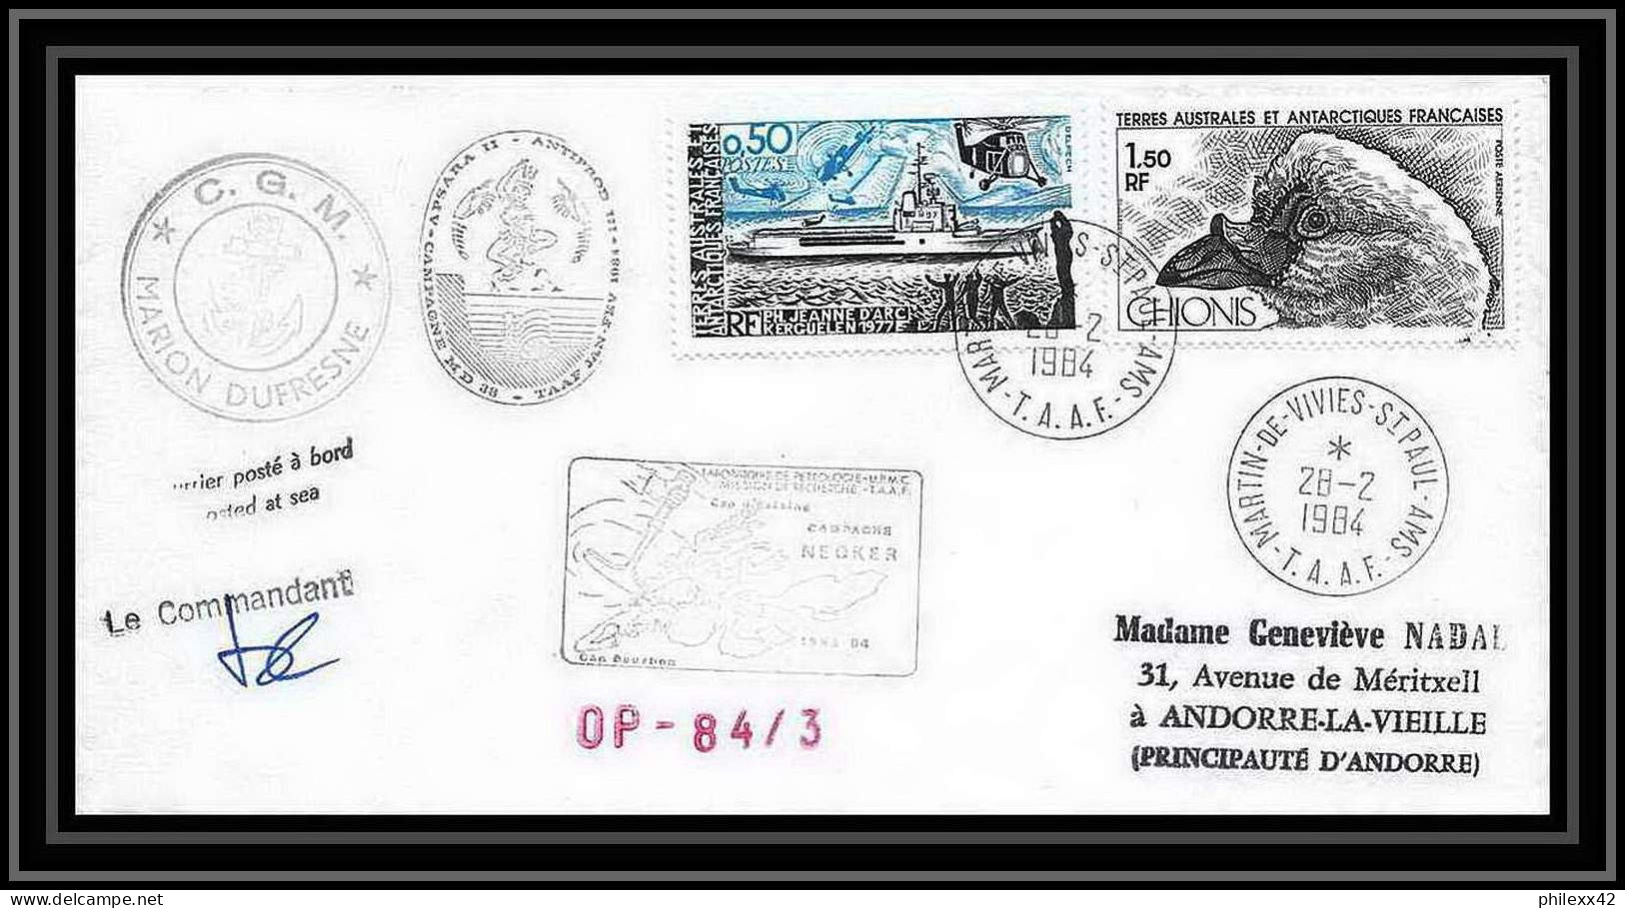 1225 Campagne Neoker 28/2/1984 Marion Dufresne TAAF Antarctic Terres Australes Lettre (cover) Signé Signed - Lettres & Documents